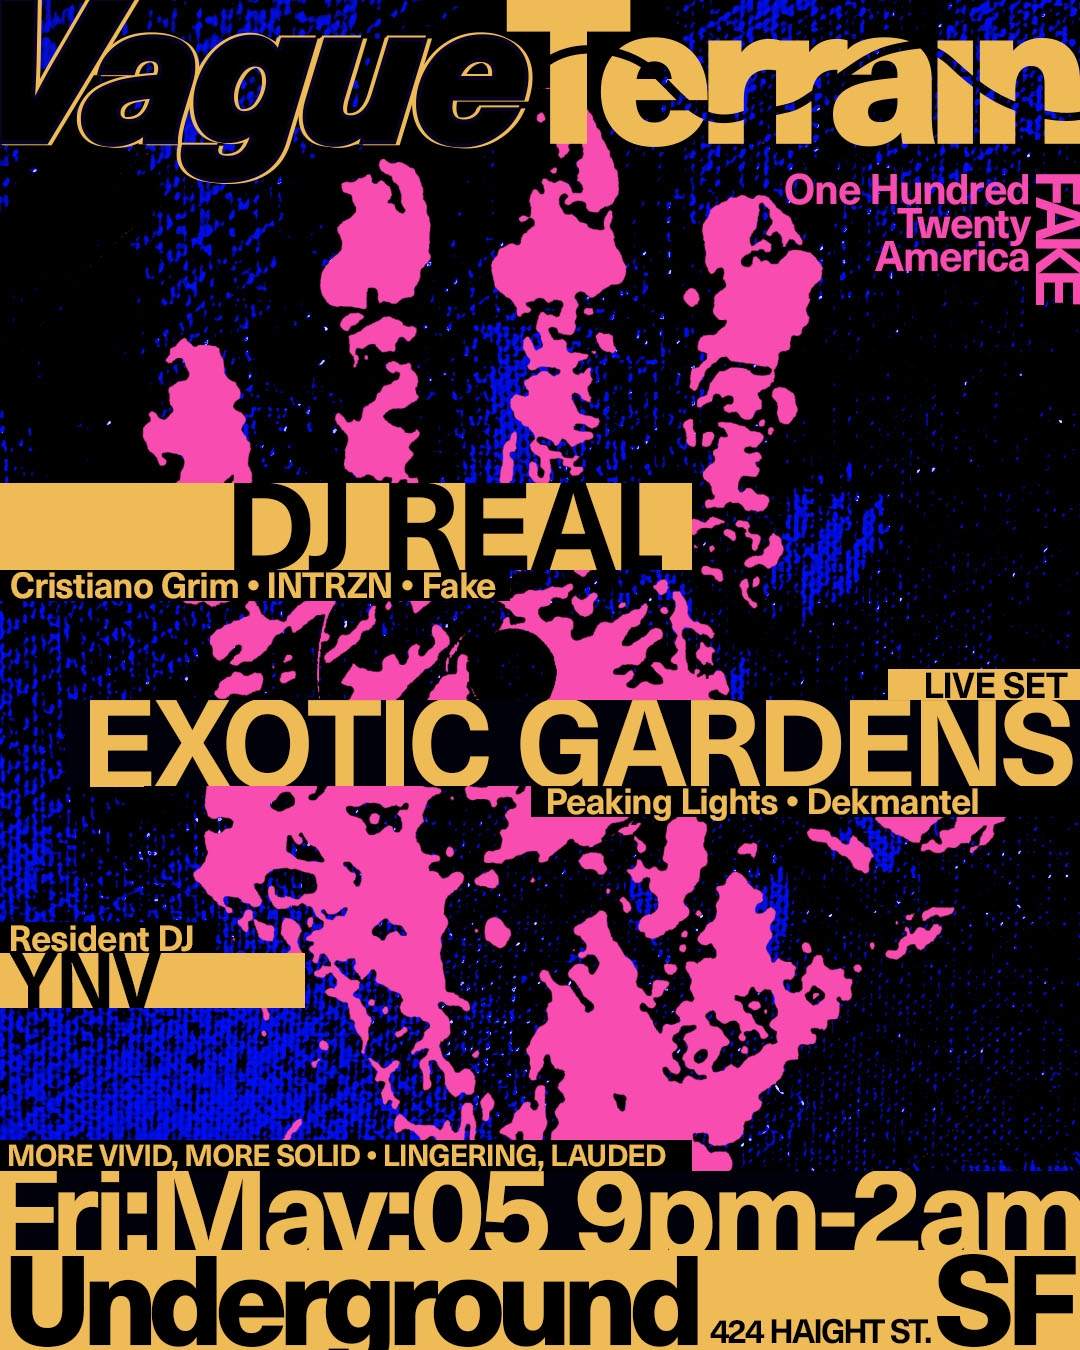 Vague Terrain with Exotic Gardens + DJ REAL - フライヤー表